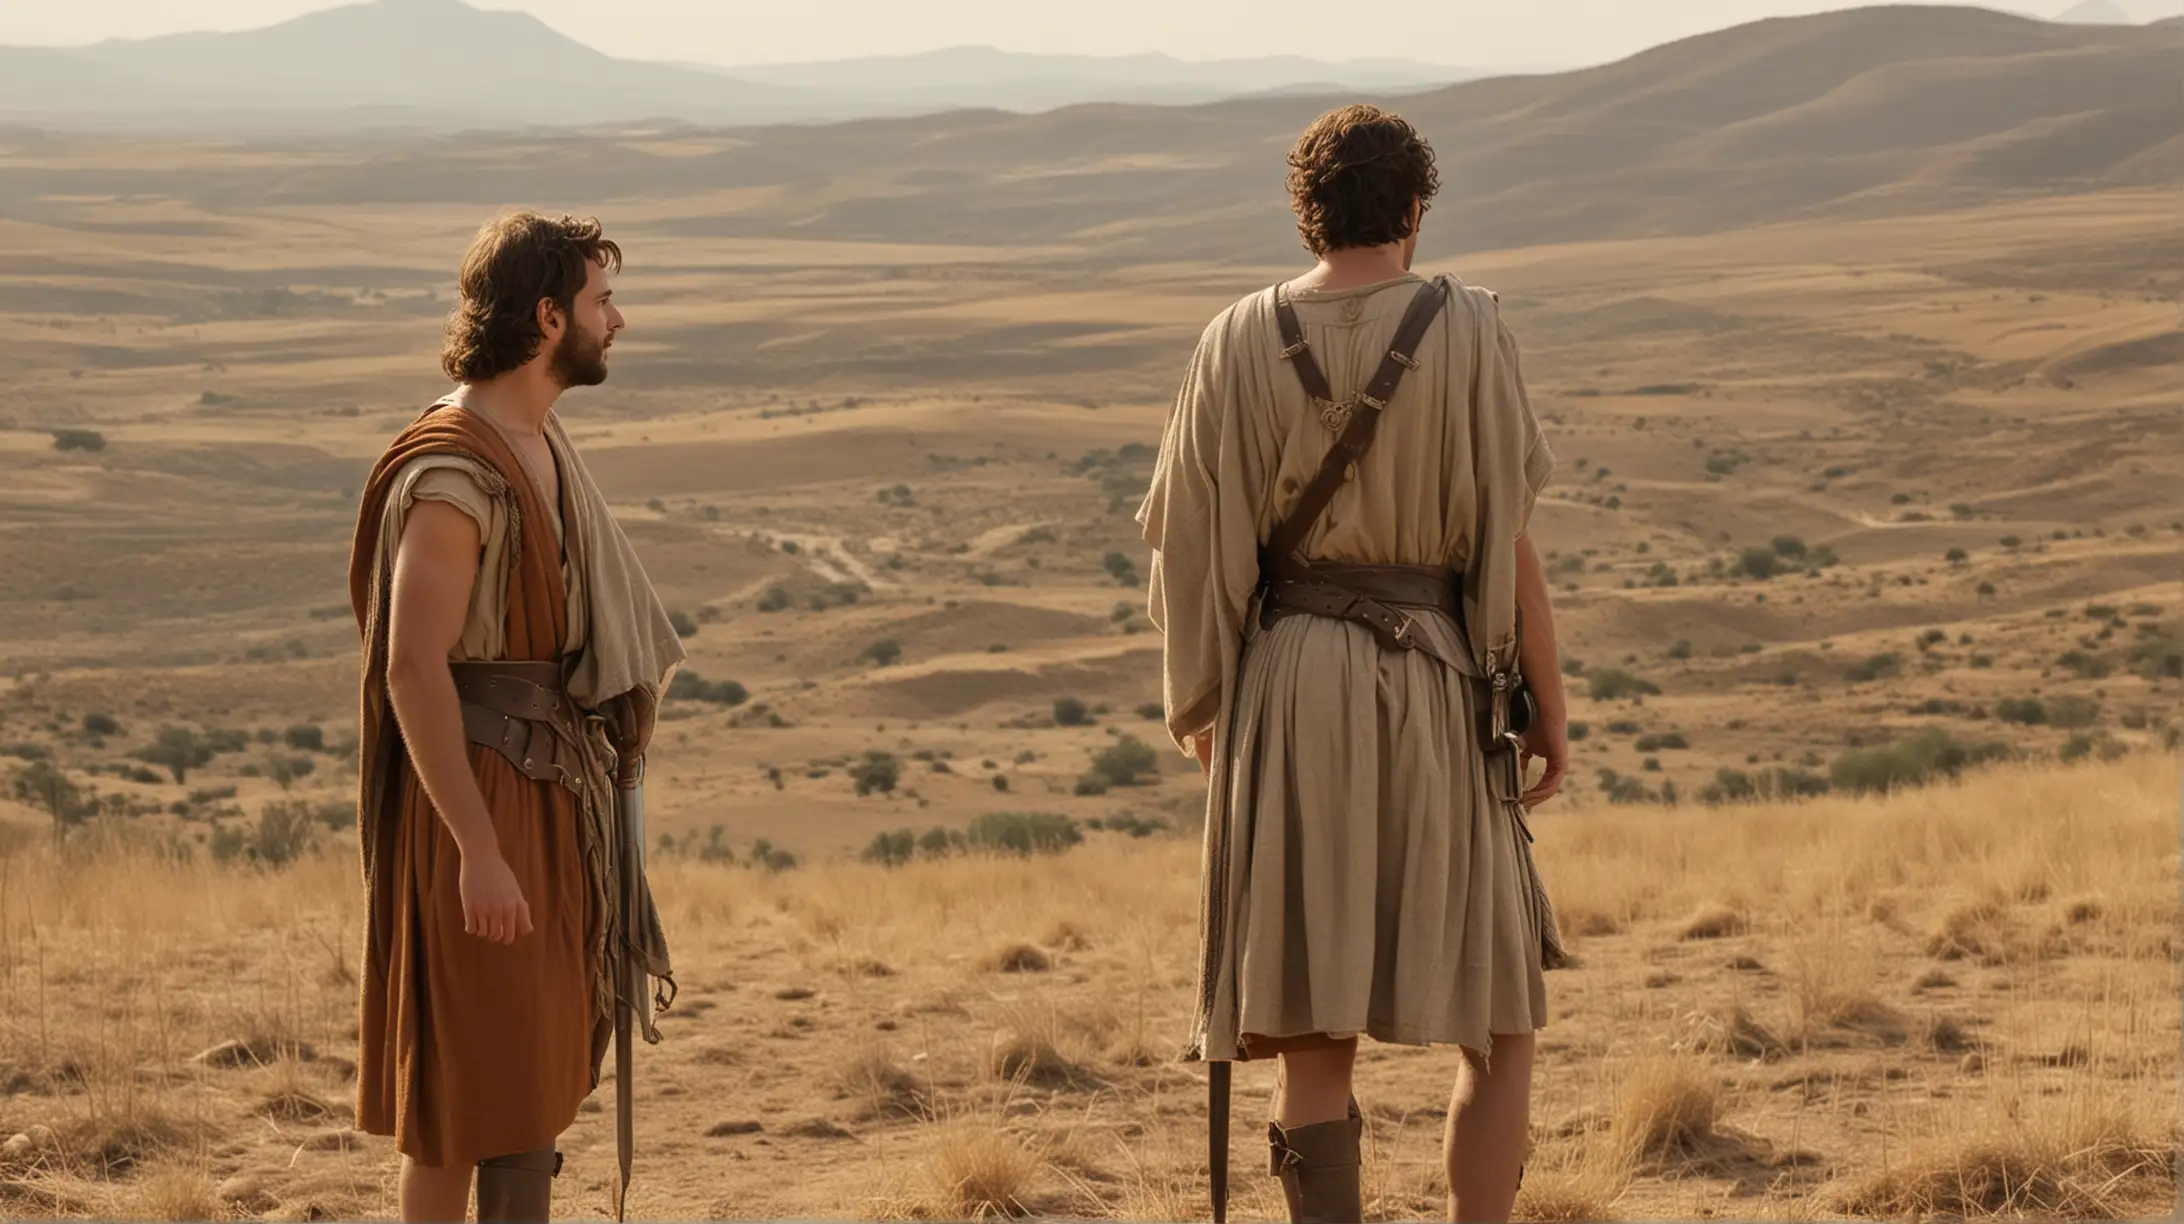 King David Discussing with a Companion in a Biblical Desert Landscape